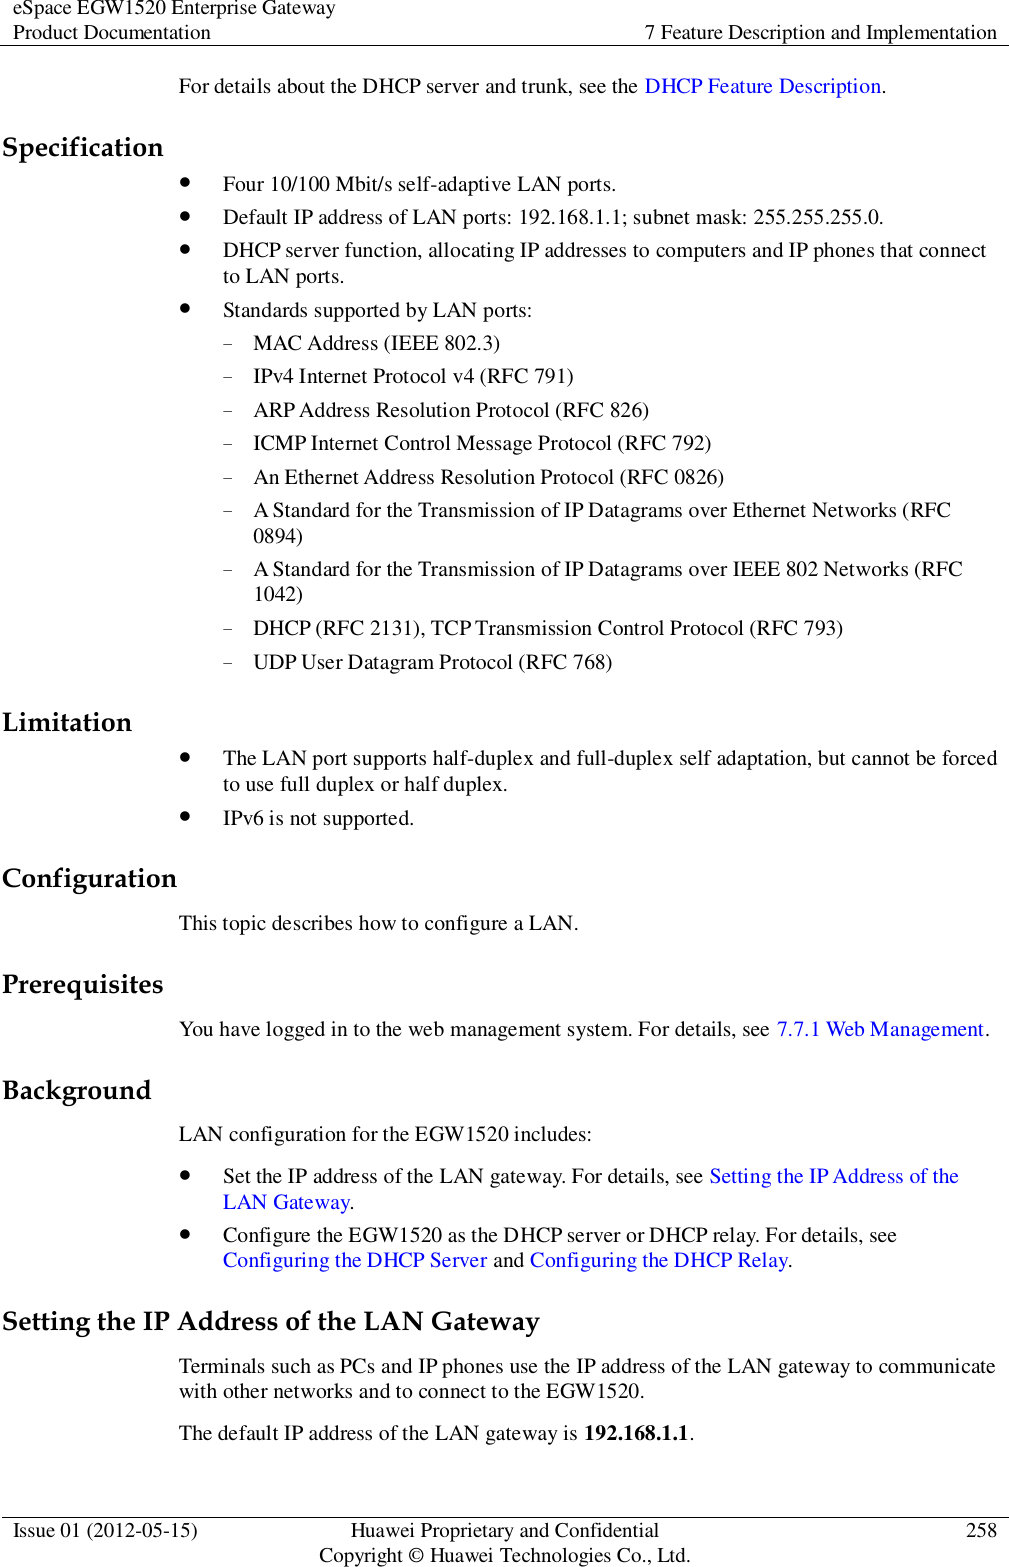 eSpace EGW1520 Enterprise Gateway Product Documentation 7 Feature Description and Implementation  Issue 01 (2012-05-15) Huawei Proprietary and Confidential                                     Copyright © Huawei Technologies Co., Ltd. 258  For details about the DHCP server and trunk, see the DHCP Feature Description. Specification  Four 10/100 Mbit/s self-adaptive LAN ports.  Default IP address of LAN ports: 192.168.1.1; subnet mask: 255.255.255.0.  DHCP server function, allocating IP addresses to computers and IP phones that connect to LAN ports.  Standards supported by LAN ports: − MAC Address (IEEE 802.3) − IPv4 Internet Protocol v4 (RFC 791) − ARP Address Resolution Protocol (RFC 826) − ICMP Internet Control Message Protocol (RFC 792) − An Ethernet Address Resolution Protocol (RFC 0826) − A Standard for the Transmission of IP Datagrams over Ethernet Networks (RFC 0894) − A Standard for the Transmission of IP Datagrams over IEEE 802 Networks (RFC 1042) − DHCP (RFC 2131), TCP Transmission Control Protocol (RFC 793) − UDP User Datagram Protocol (RFC 768) Limitation  The LAN port supports half-duplex and full-duplex self adaptation, but cannot be forced to use full duplex or half duplex.  IPv6 is not supported. Configuration This topic describes how to configure a LAN. Prerequisites You have logged in to the web management system. For details, see 7.7.1 Web Management. Background LAN configuration for the EGW1520 includes:  Set the IP address of the LAN gateway. For details, see Setting the IP Address of the LAN Gateway.  Configure the EGW1520 as the DHCP server or DHCP relay. For details, see Configuring the DHCP Server and Configuring the DHCP Relay. Setting the IP Address of the LAN Gateway Terminals such as PCs and IP phones use the IP address of the LAN gateway to communicate with other networks and to connect to the EGW1520. The default IP address of the LAN gateway is 192.168.1.1. 